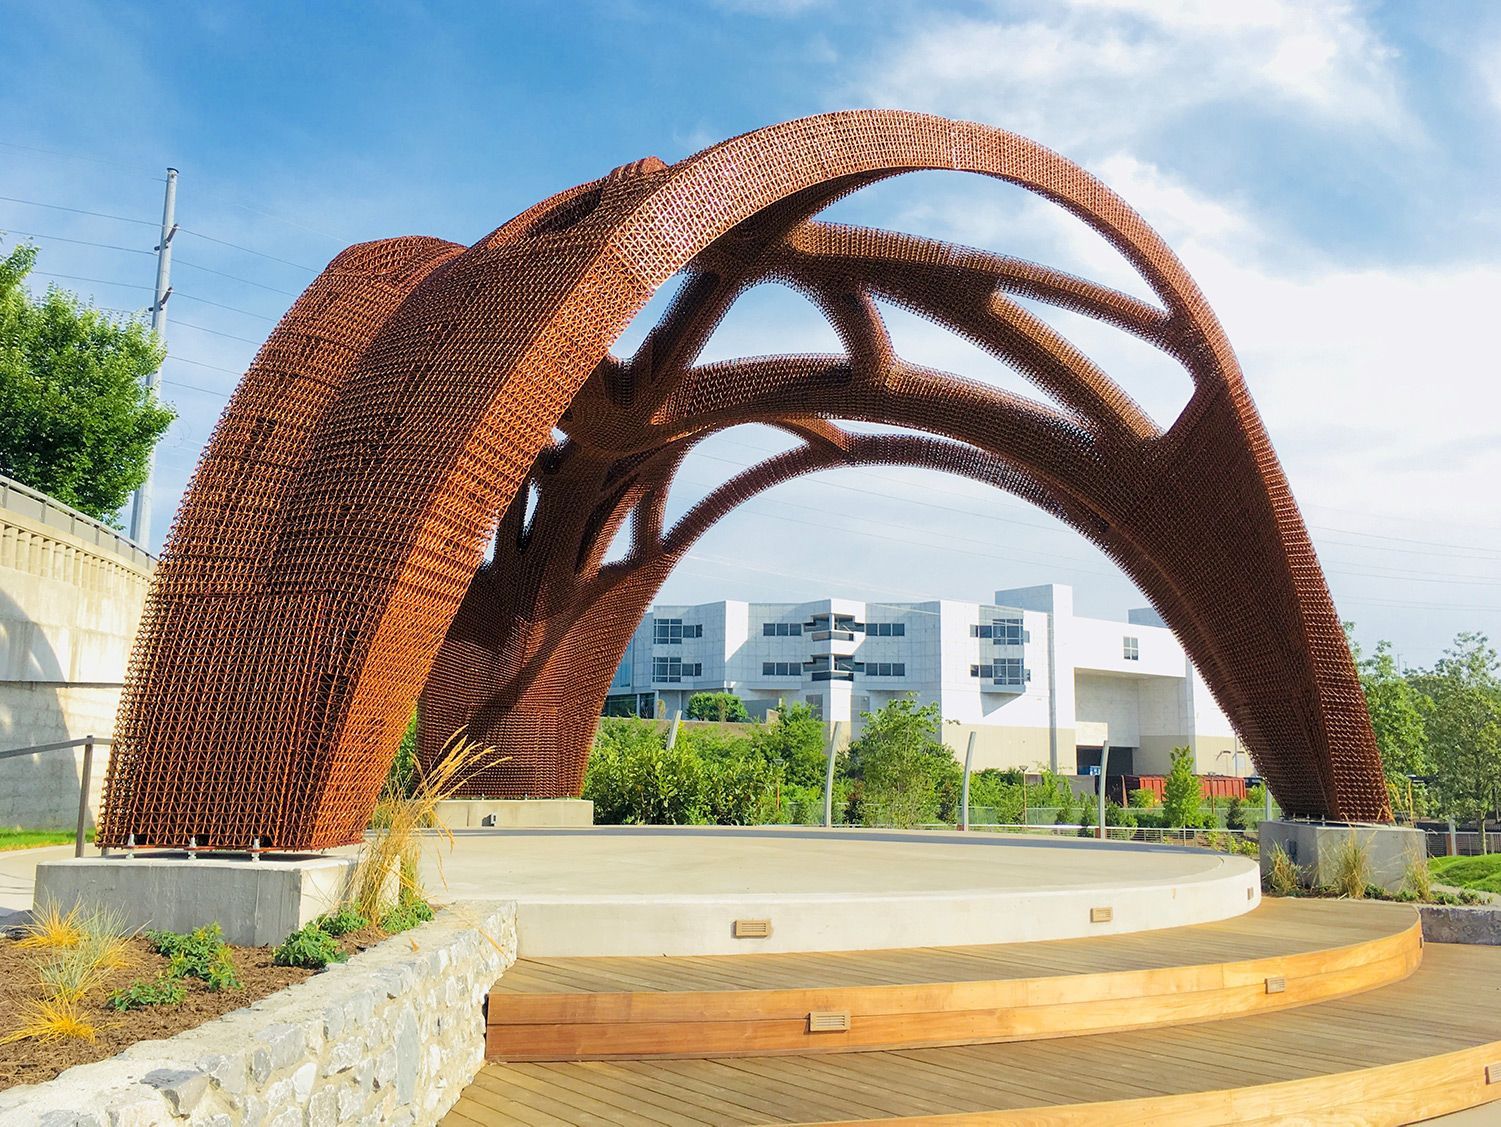 World's Largest 3D-Printed Structure: world record in Chattanooga, Tennessee